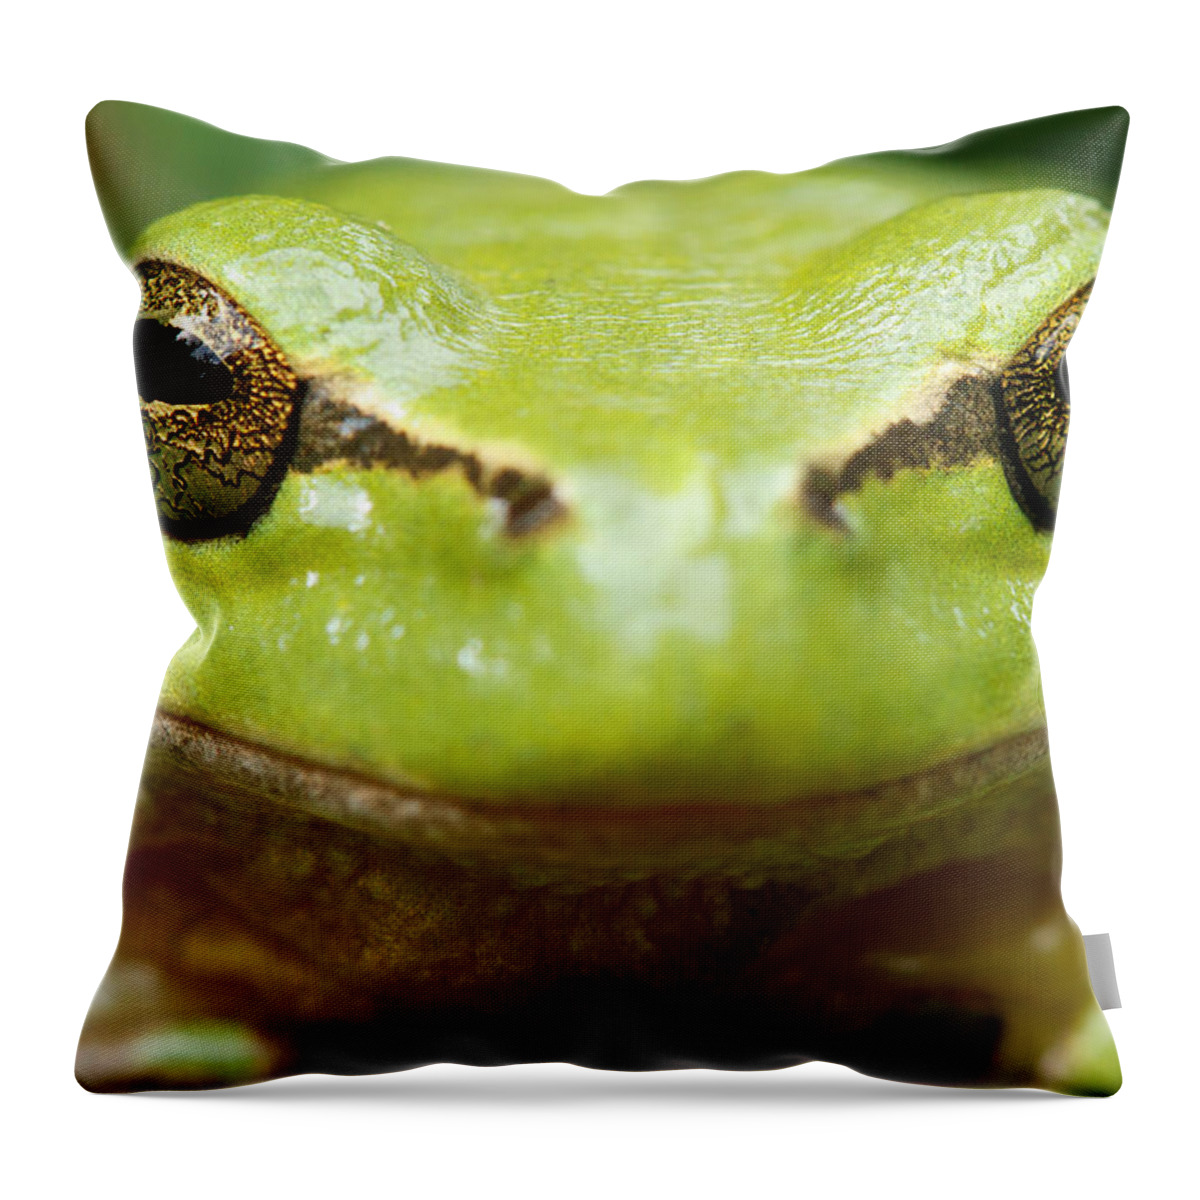 Adult Throw Pillow featuring the photograph It's Not Easy Being Green _ Tree Frog Portrait by Roeselien Raimond